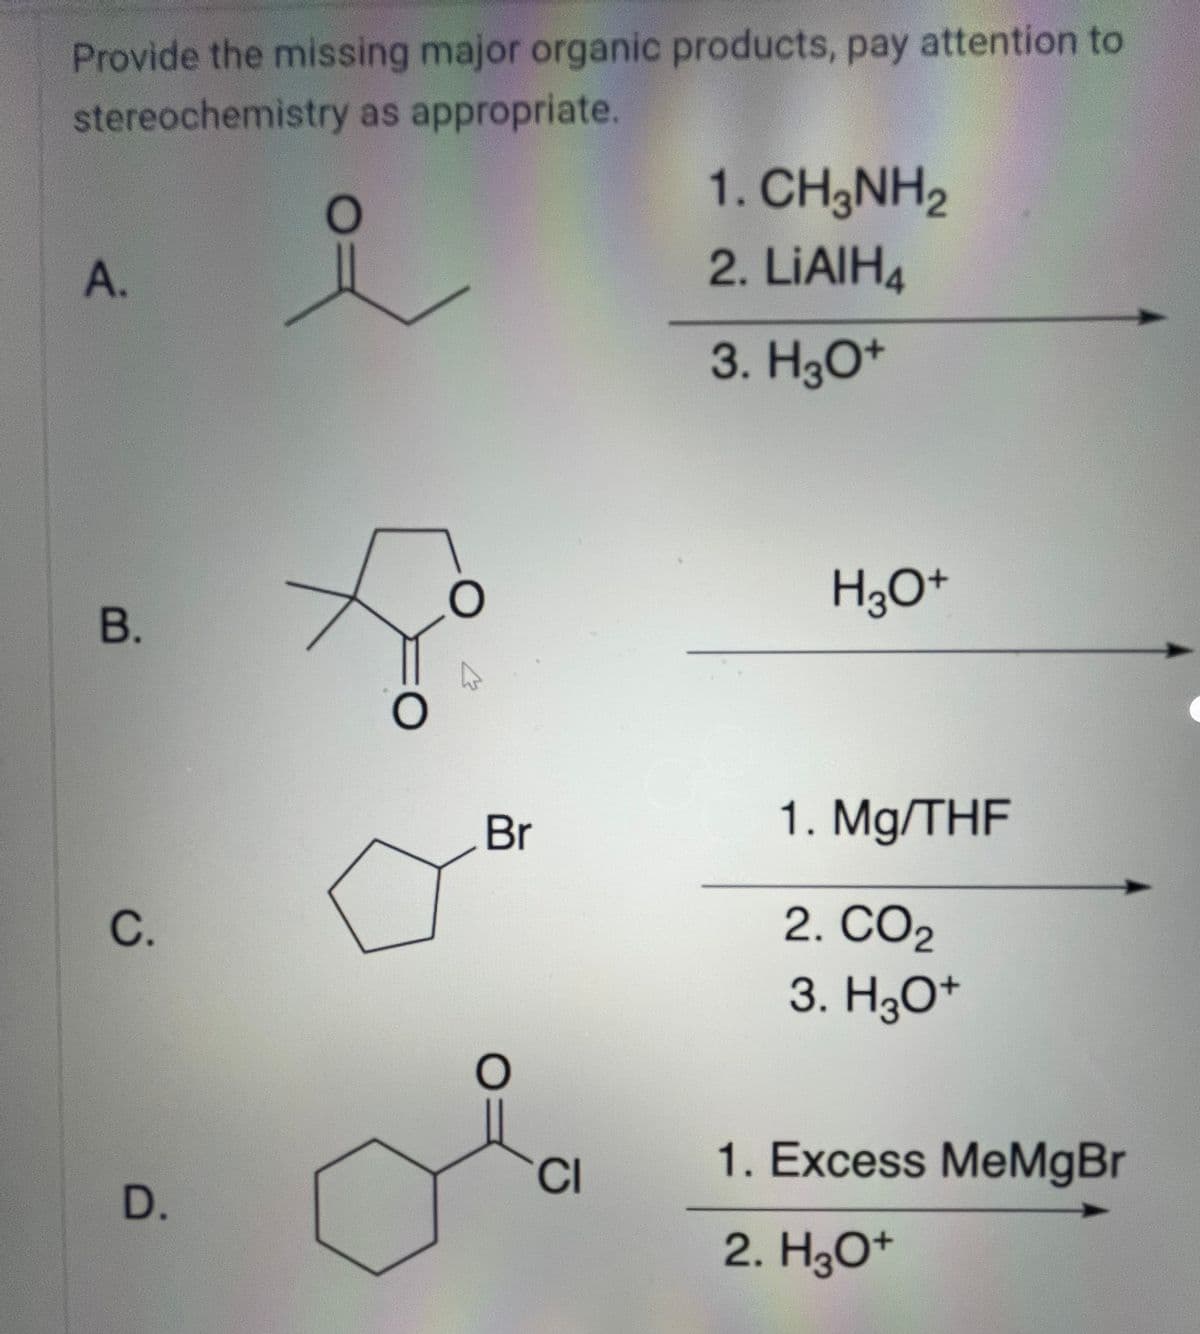 Provide the missing major organic products, pay attention to
stereochemistry as appropriate.
요
A.
B.
C.
D.
O
O
Br
O=
CI
1. CH3NH2
2. LiAlH4
3. H3O+
H3O+
1. Mg/THF
2. CO2
3. H3O+
1. Excess MeMgBr
2. H3O+